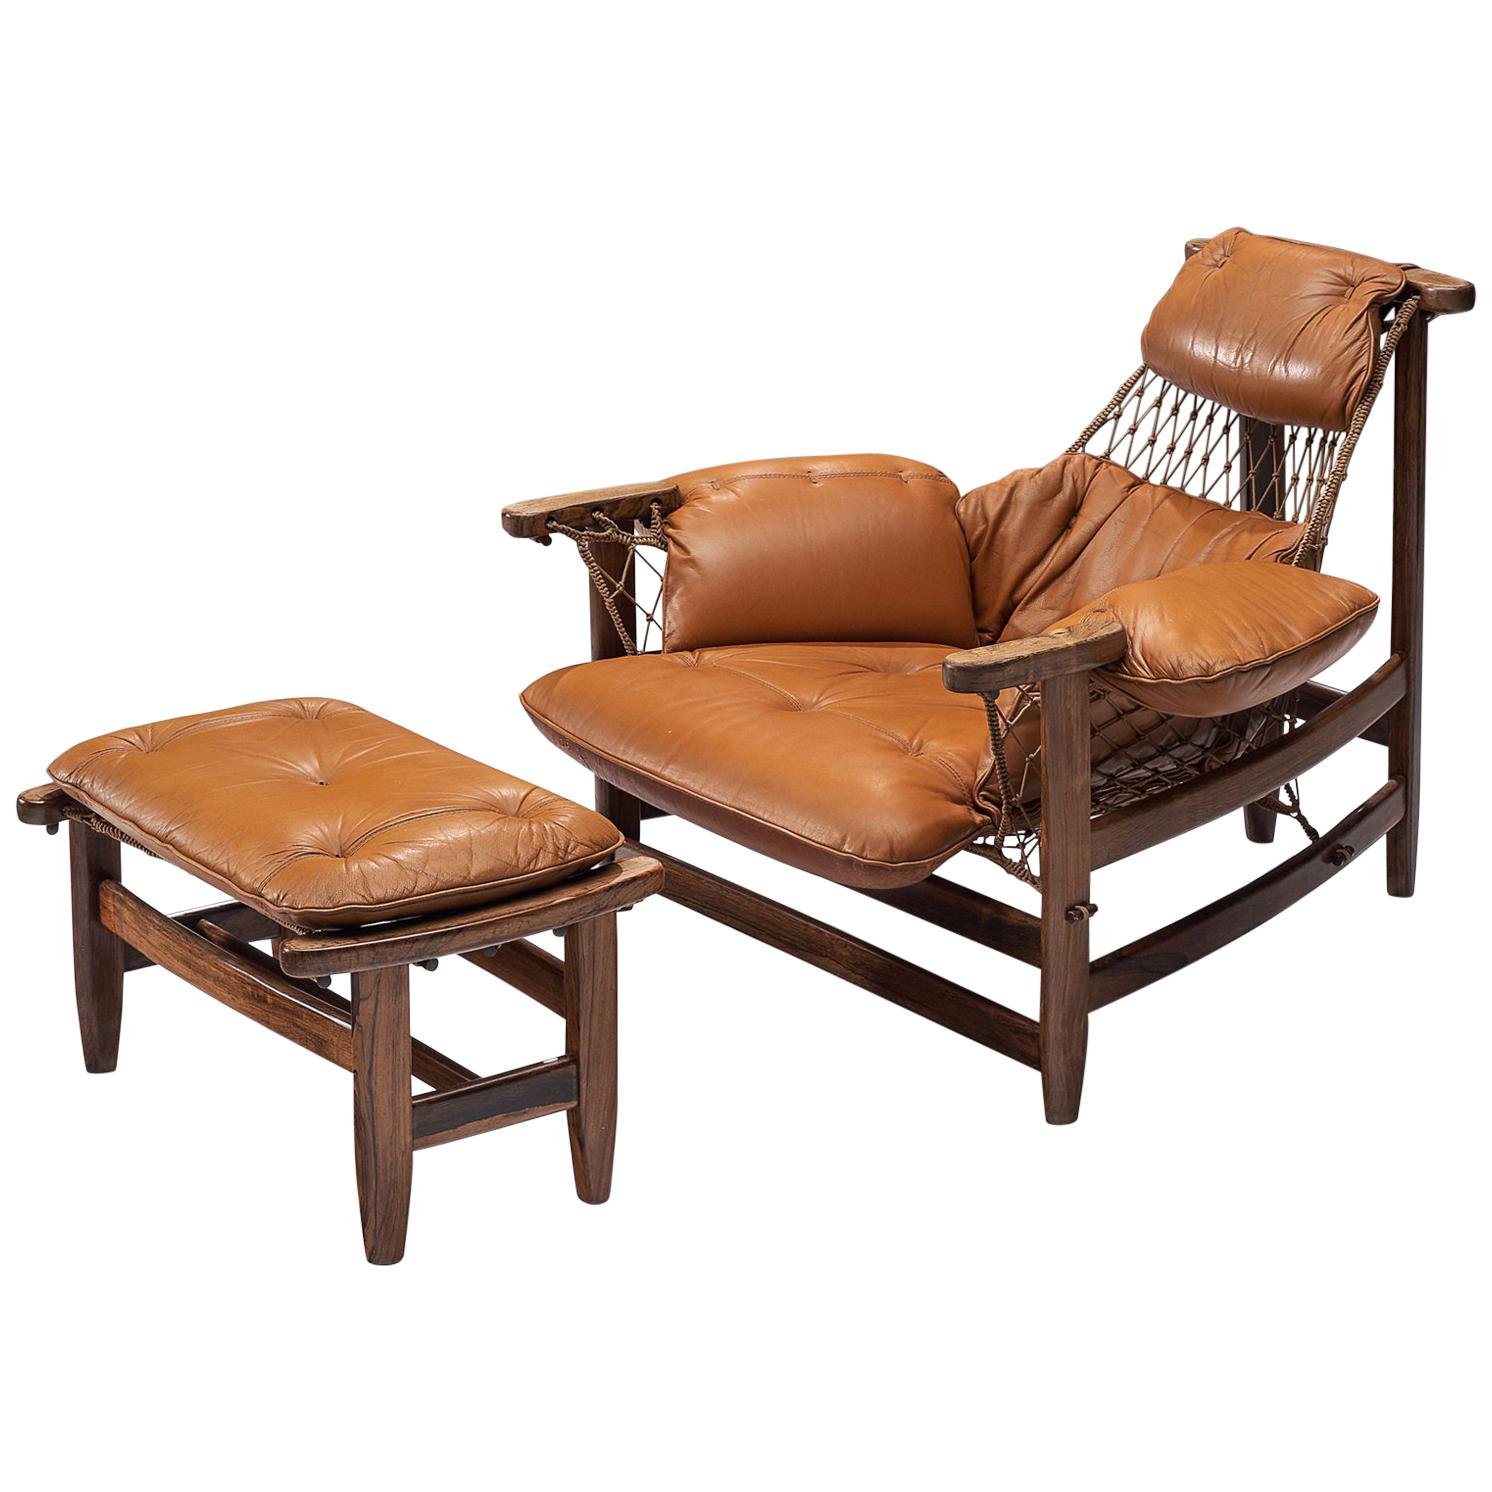 Jean Gillon Jangada Lounge Chair with Ottoman in Cognac Leather